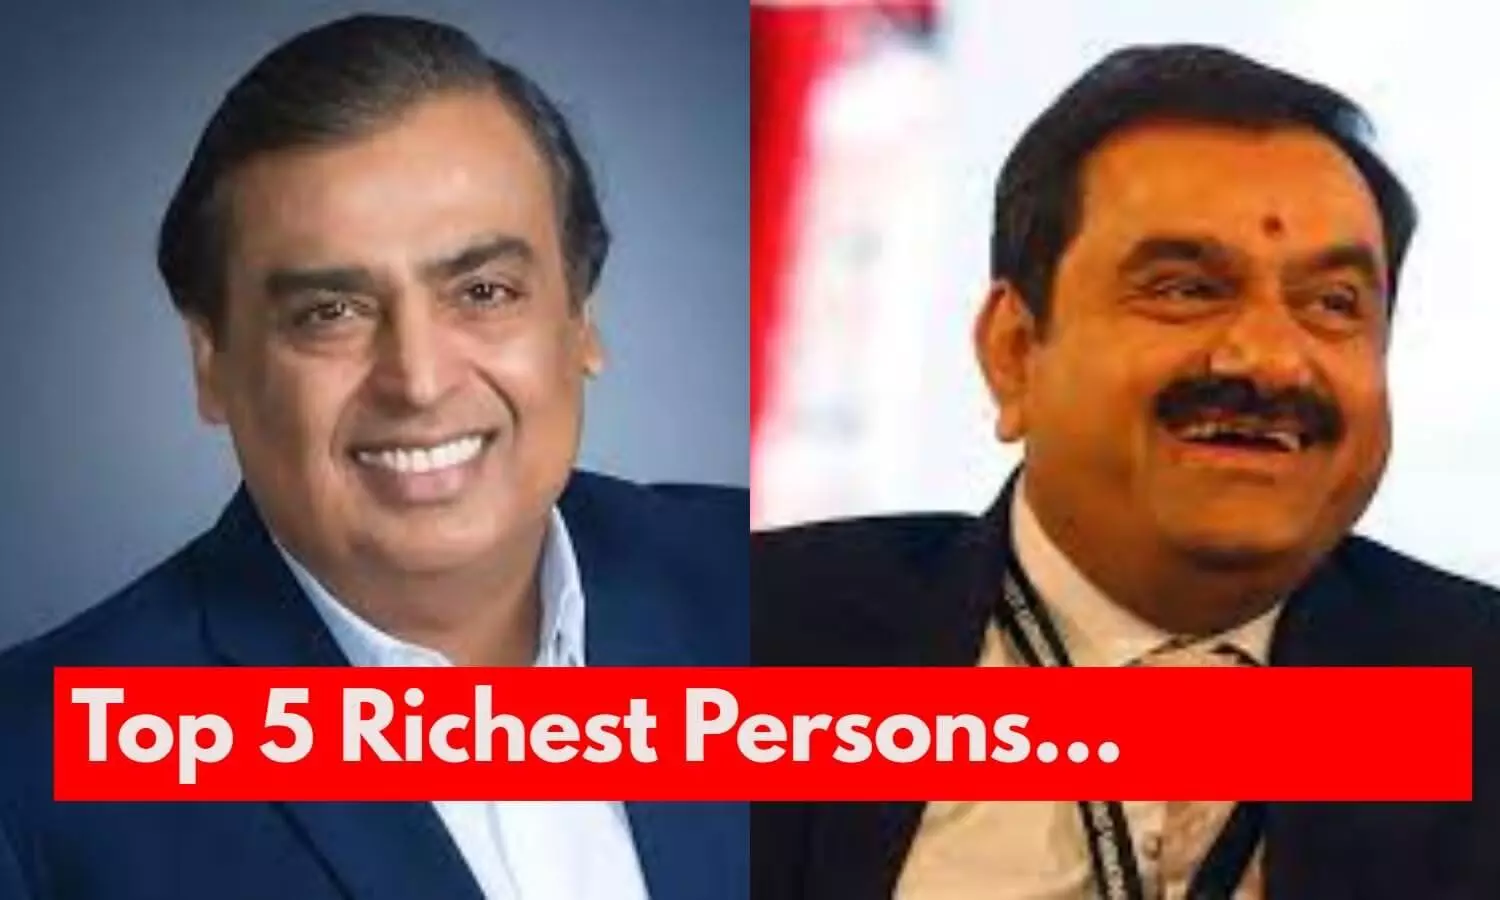 Top 5 richest persons in India in 2022 Forbes Billionaires List